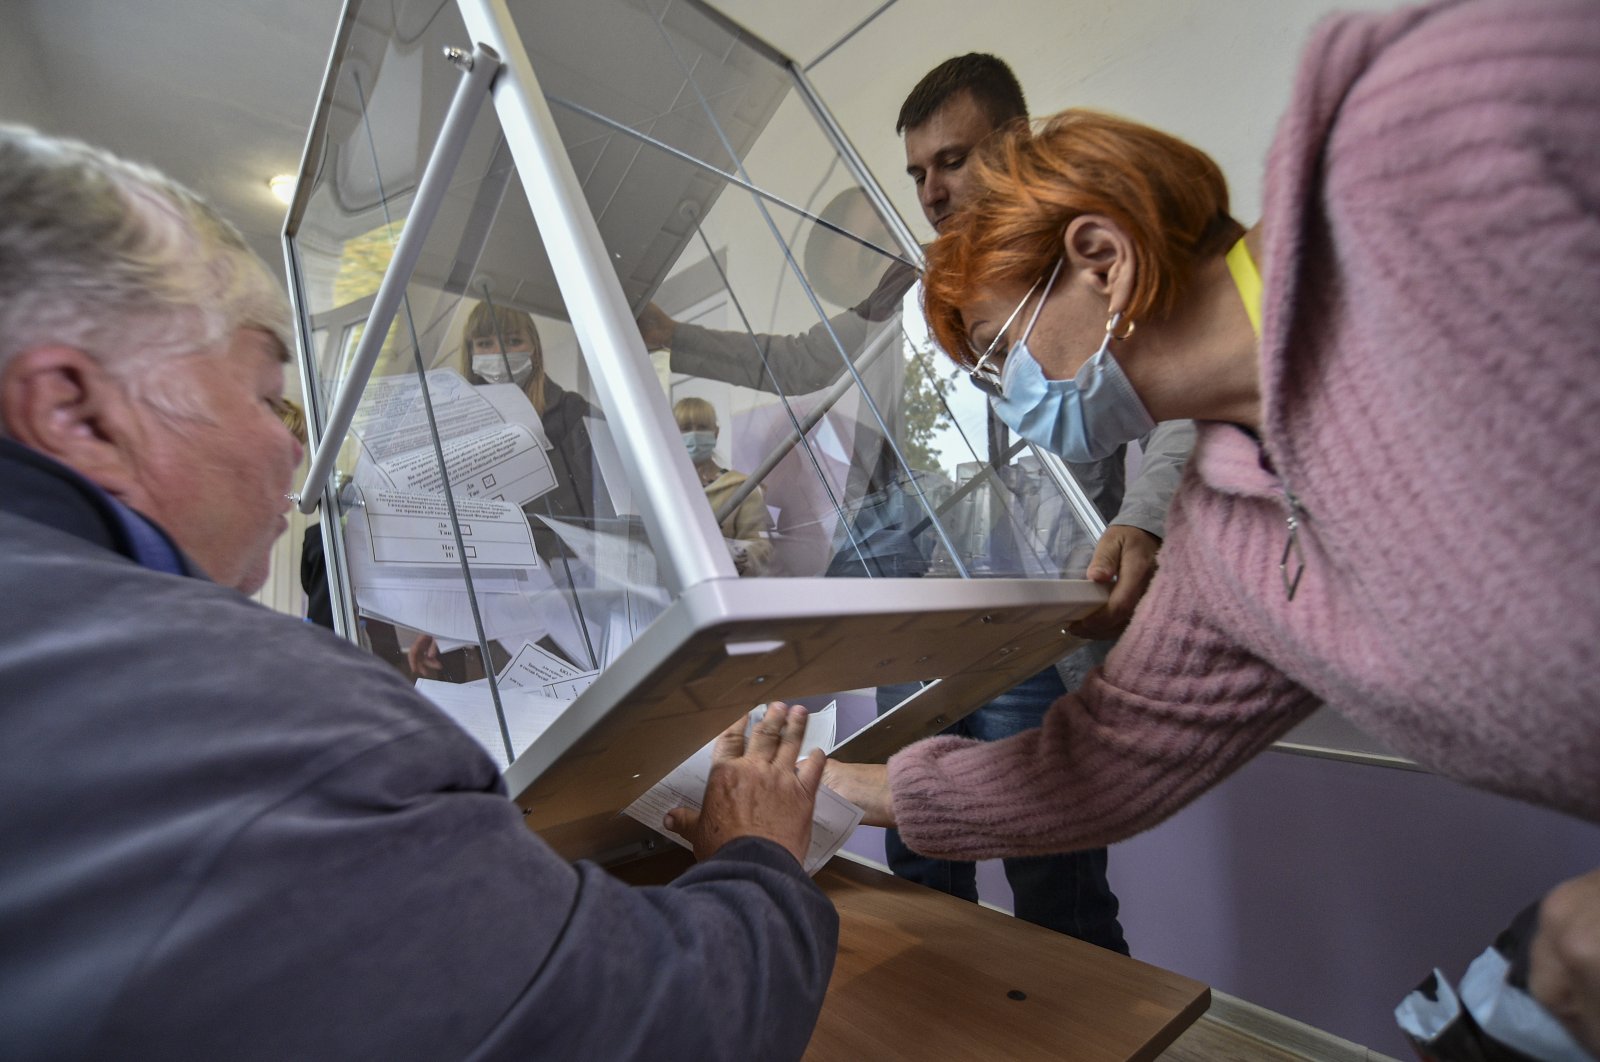 Local election officials pull out ballots for vote counting in a so-called referendum, Melitopol, Ukraine, Sept. 27, 2022. (EPA Photo)